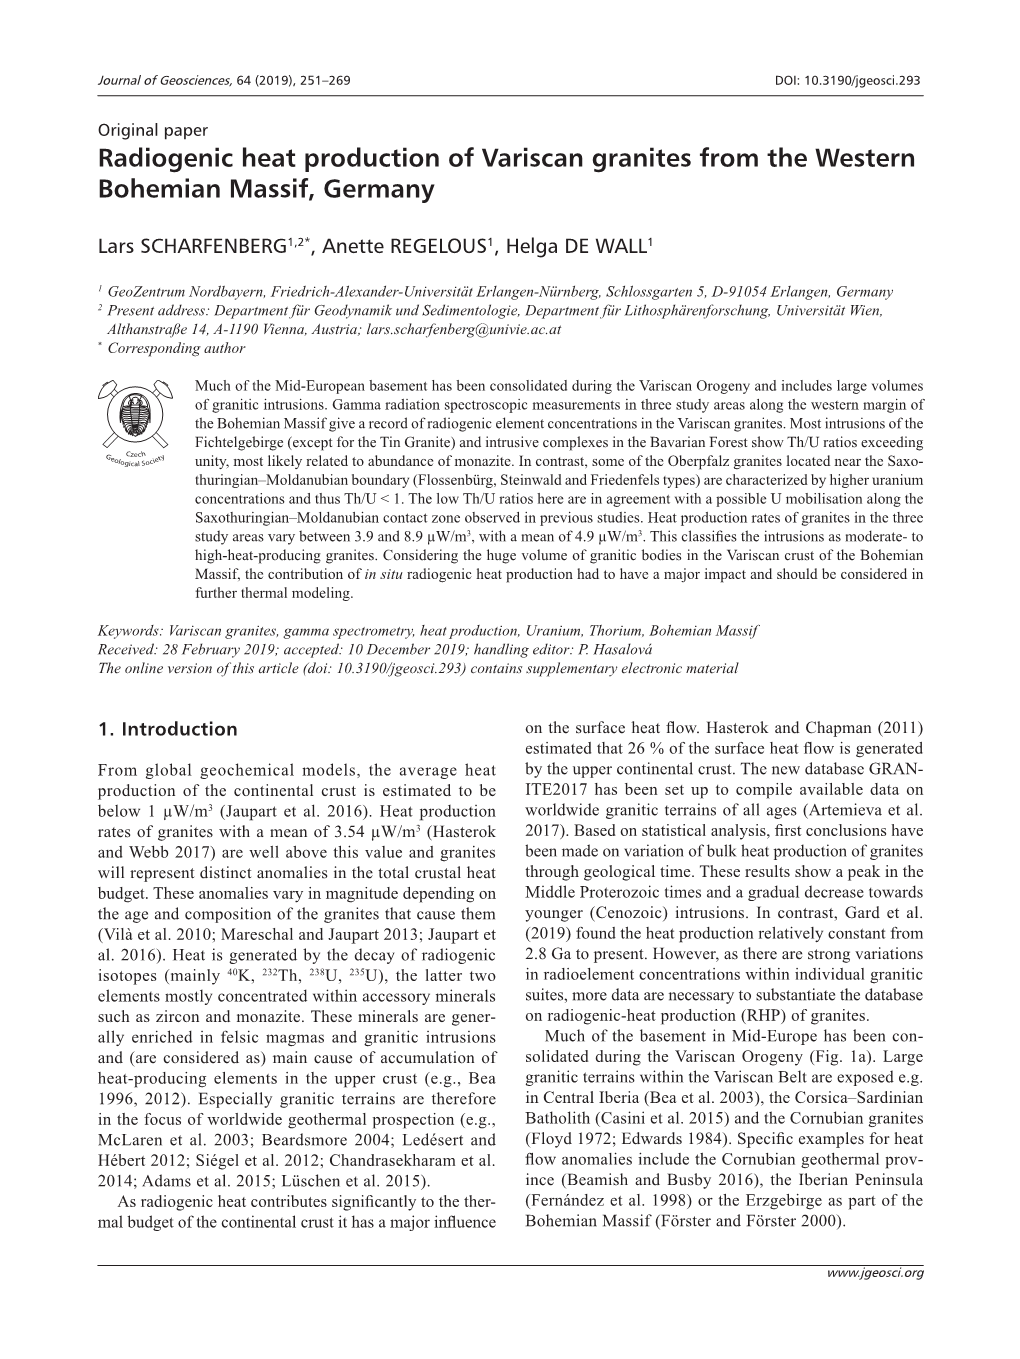 Radiogenic Heat Production of Variscan Granites from the Western Bohemian Massif, Germany